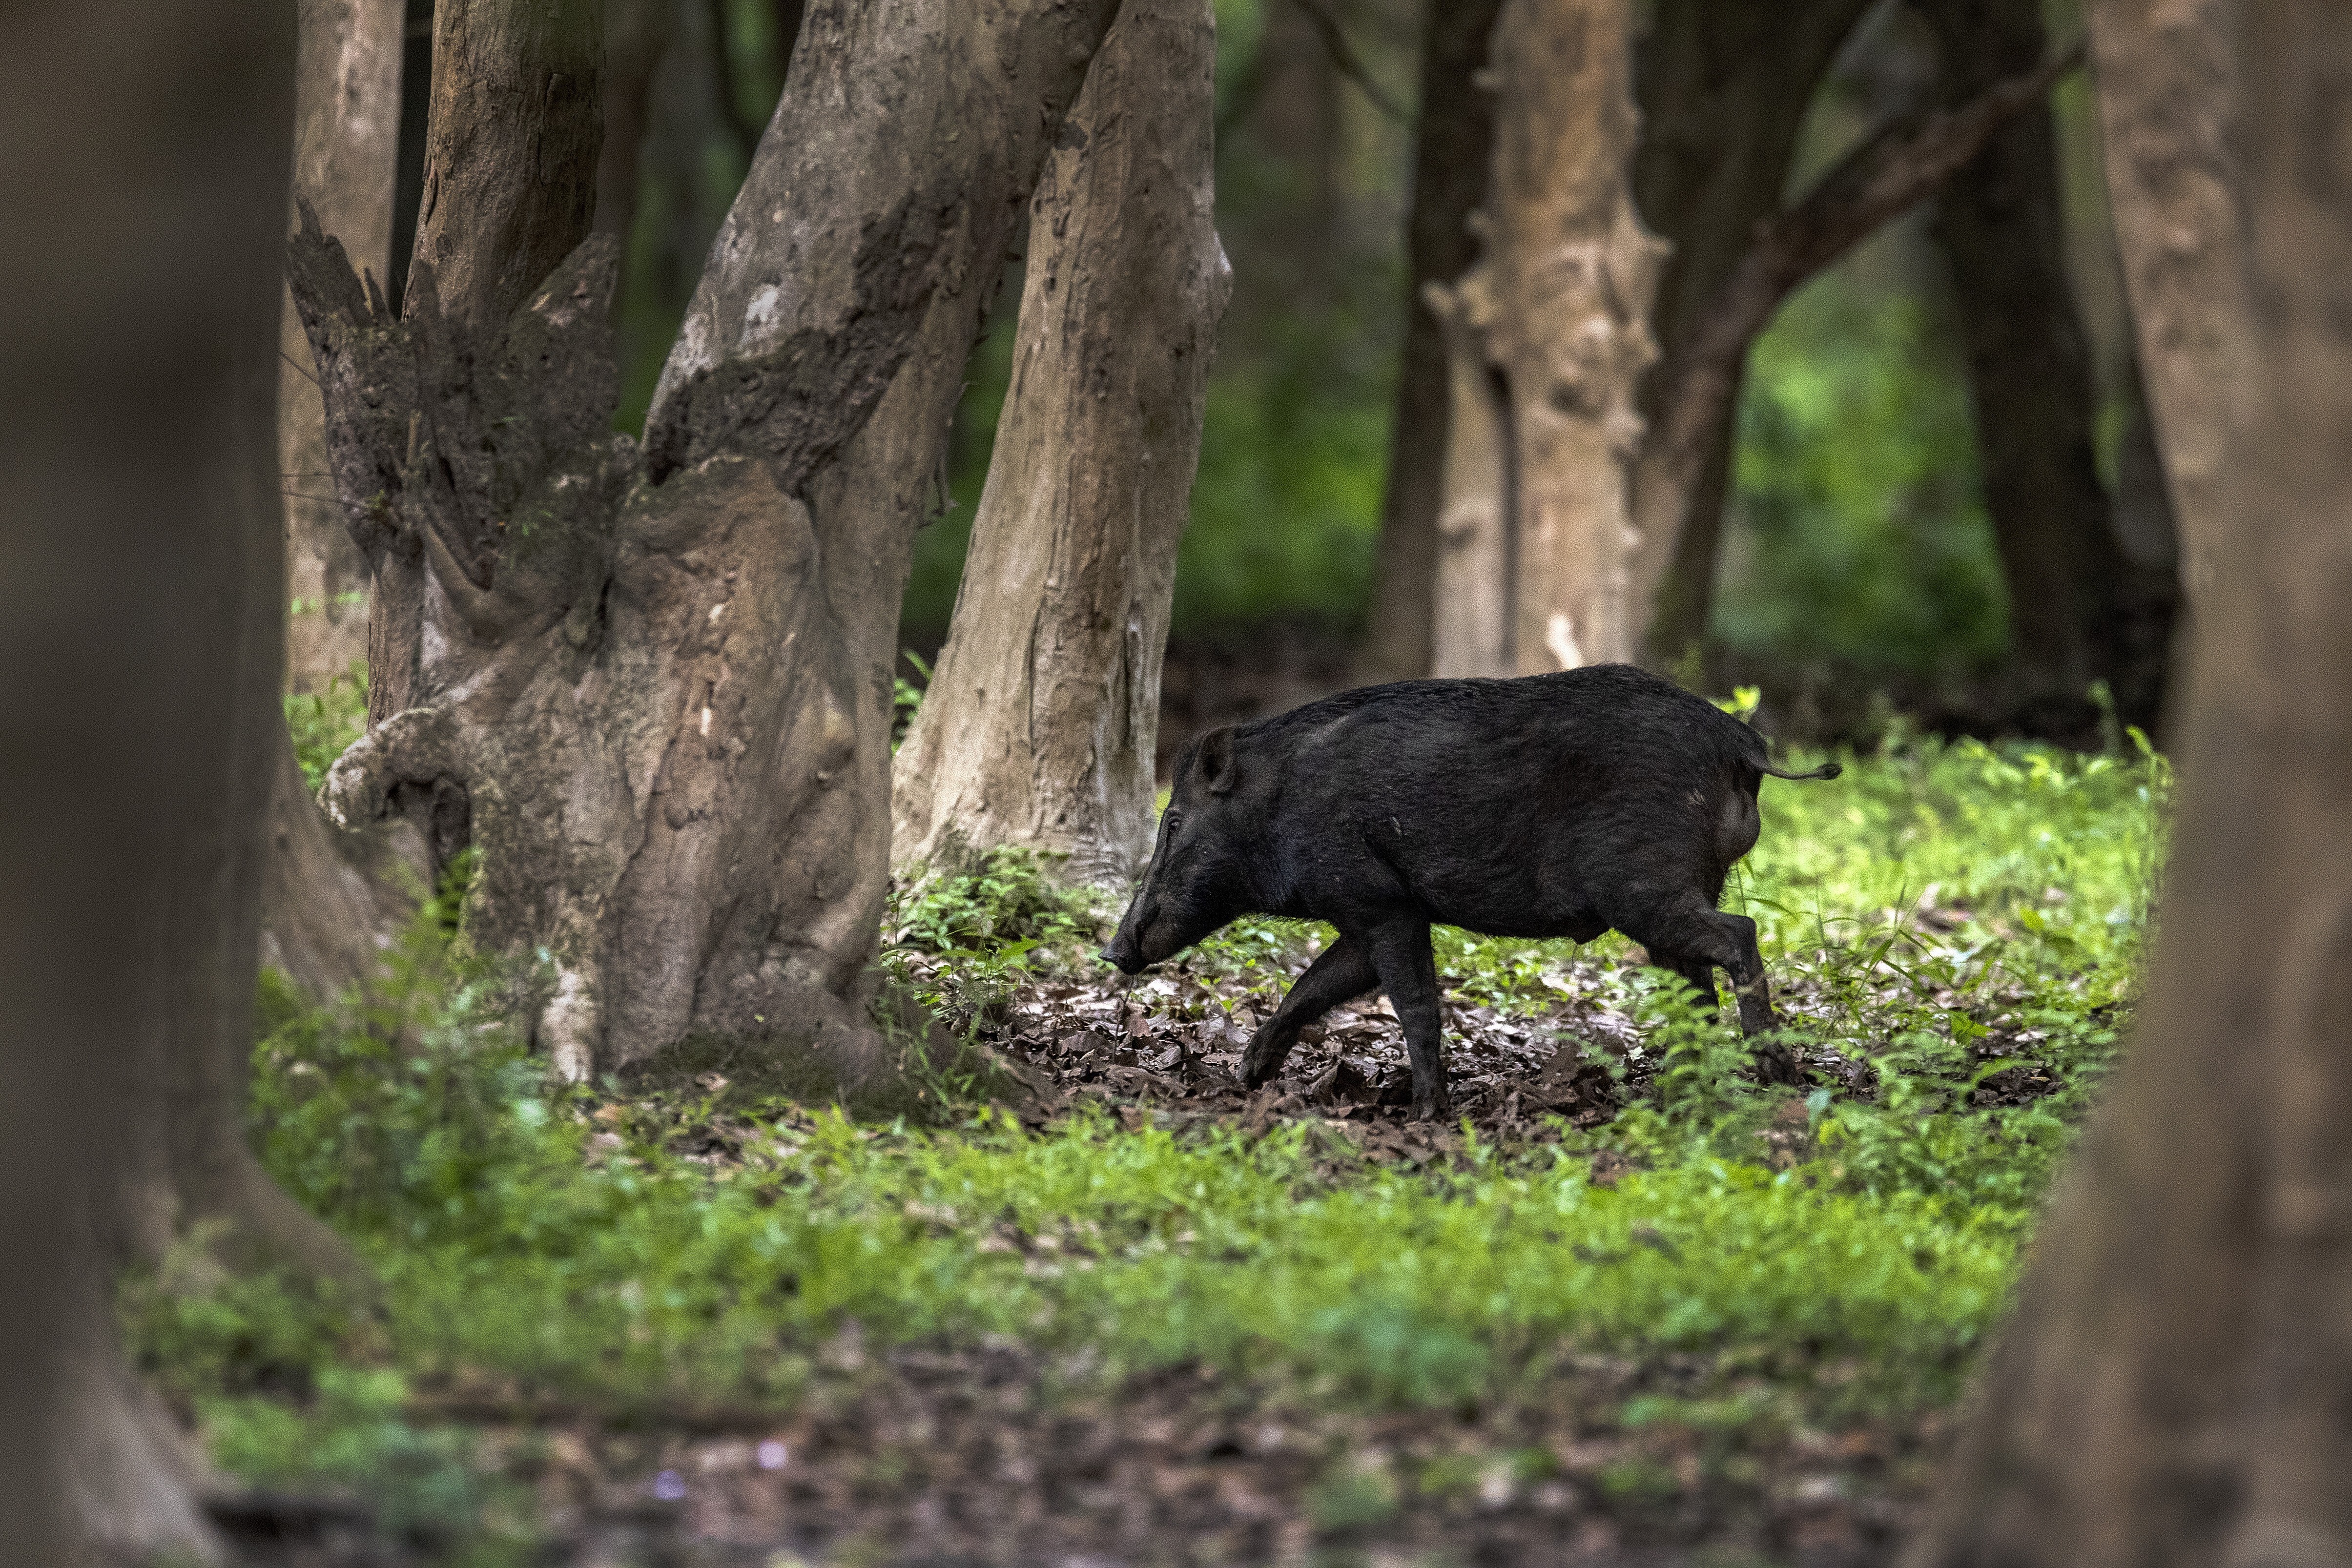 A man in West Java's Bedahan village said the wild boar was a black magic user who had transformed his or her appearance to steal from others. Photo: AP